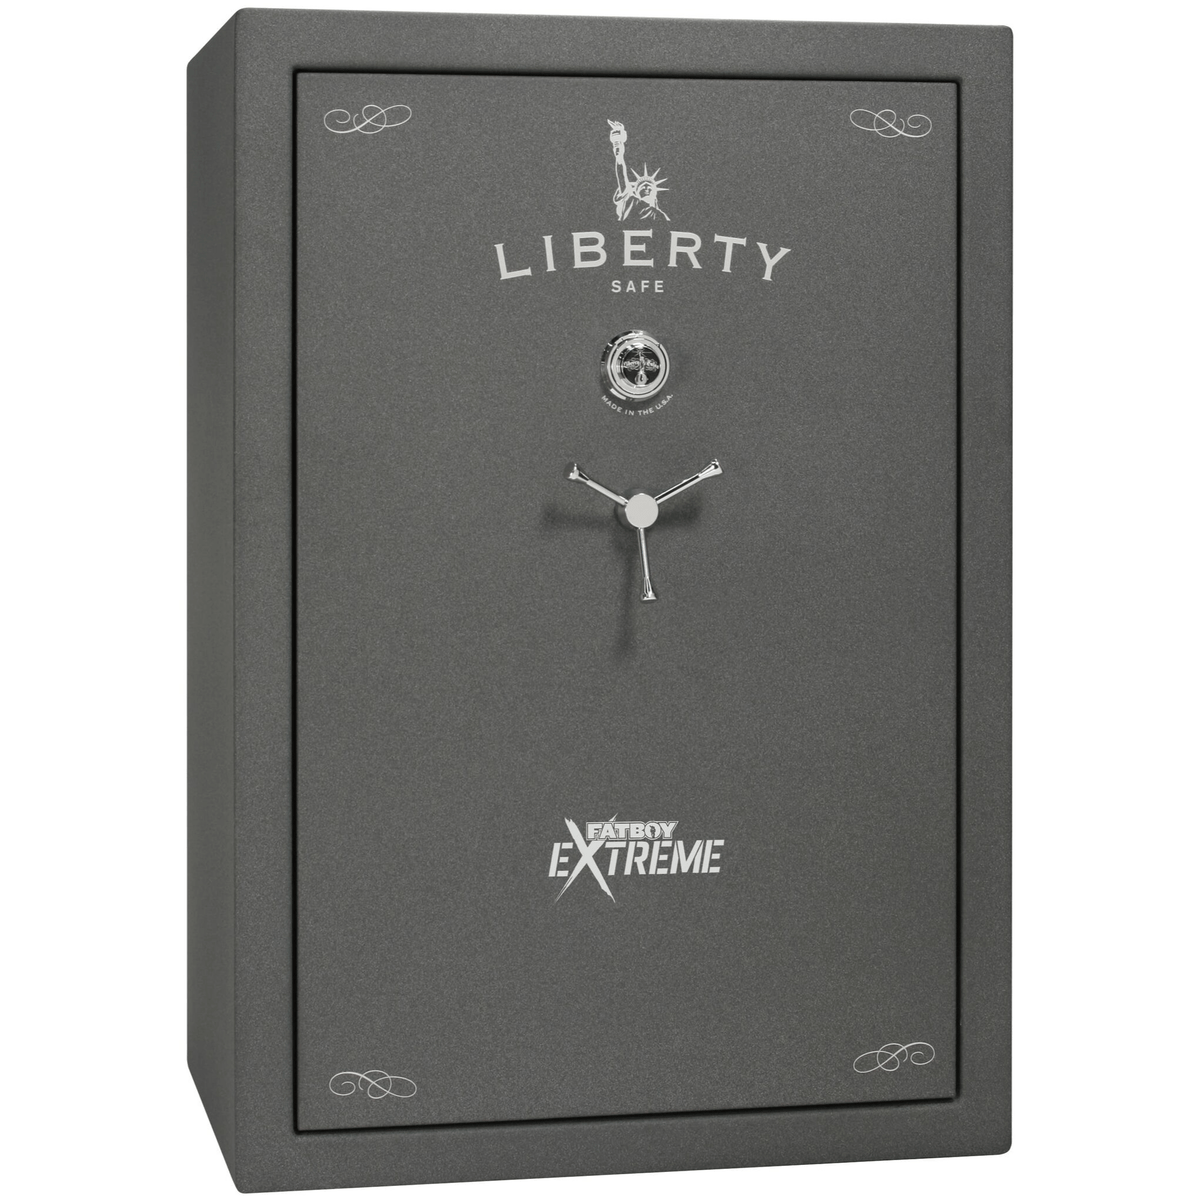 Lincoln Fatboy Extreme 64XT Safe in Textured Granite with Chrome Mechanical Lock.